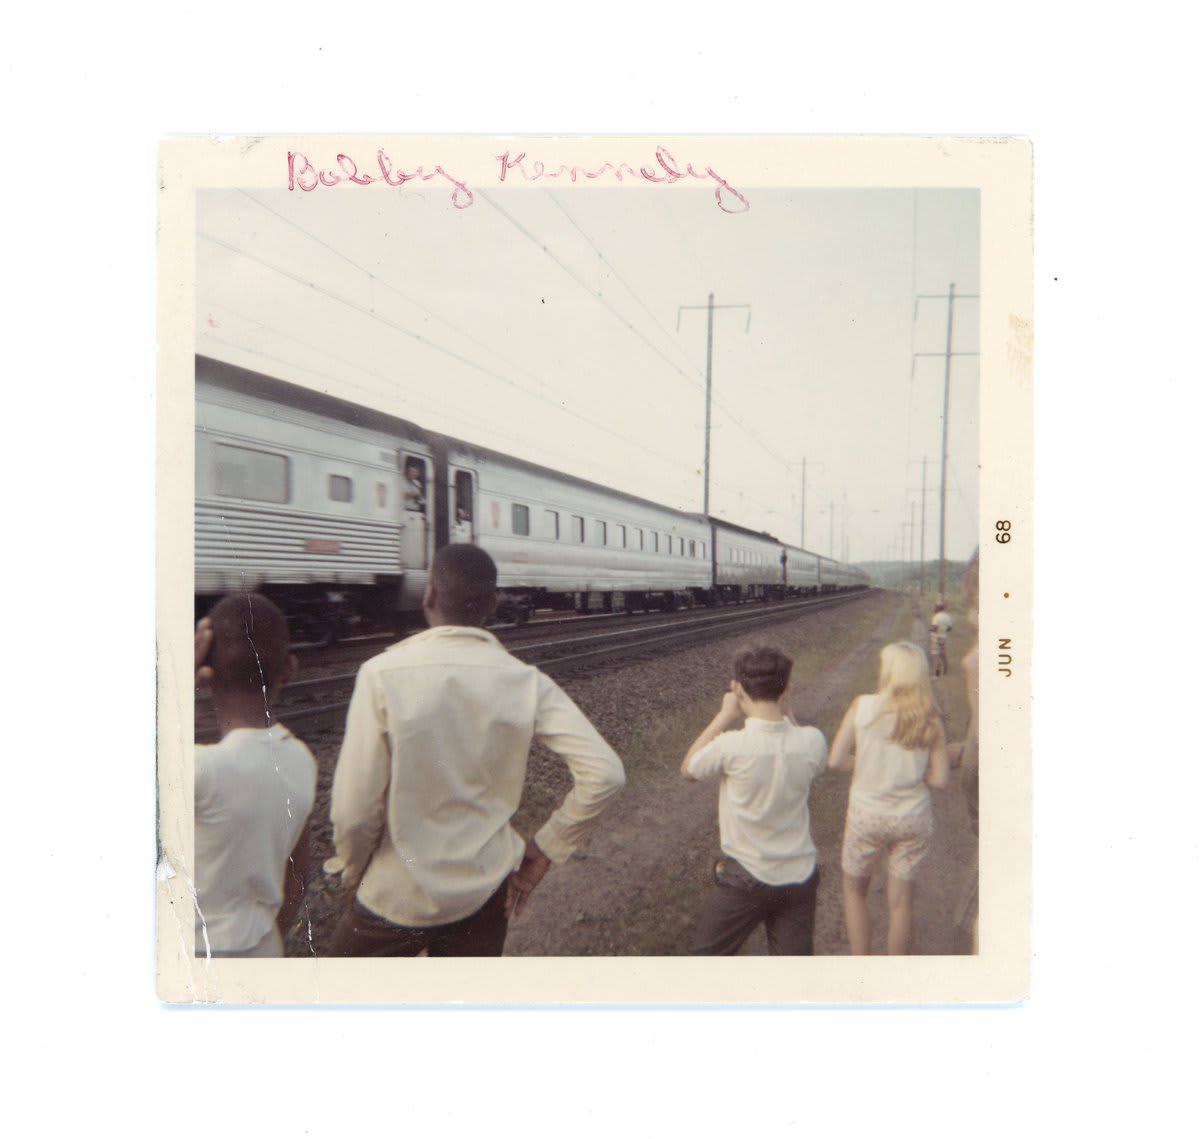 "Robert F. Kennedy Funeral Train, The People’s View" is a photobook by Rein Jelle Terpstra, who reconstructed the story of the people who paid tribute to the 21-car train carrying the body of Robert F. Kennedy from New York to Washington, DC, 50 years ago